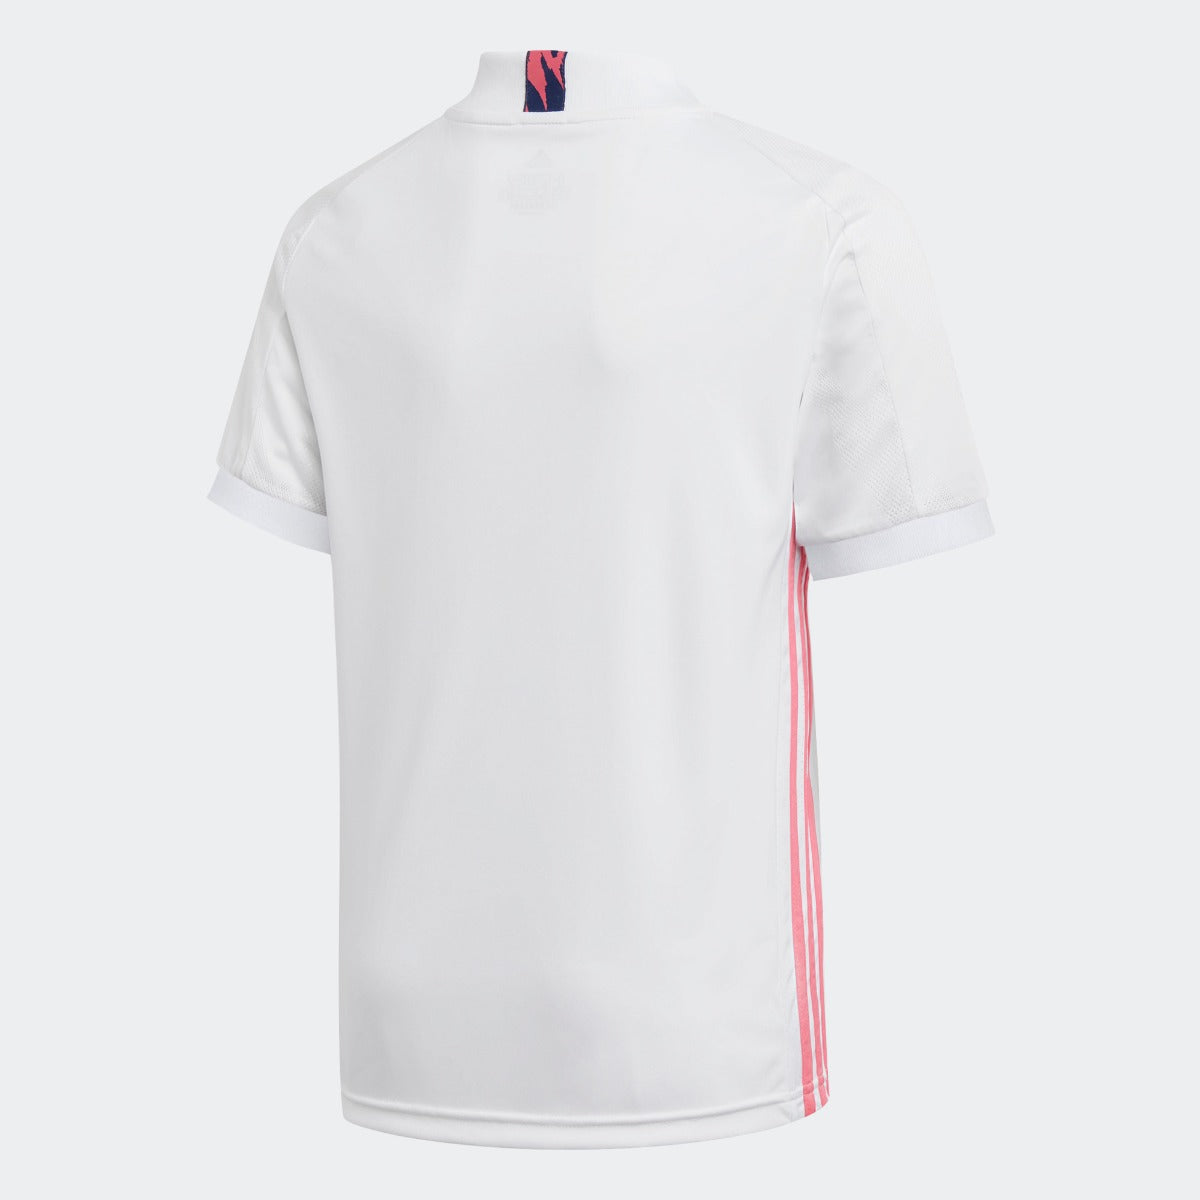 Adidas 2020-21 Real Madrid Youth Home Jersey - White-Pink